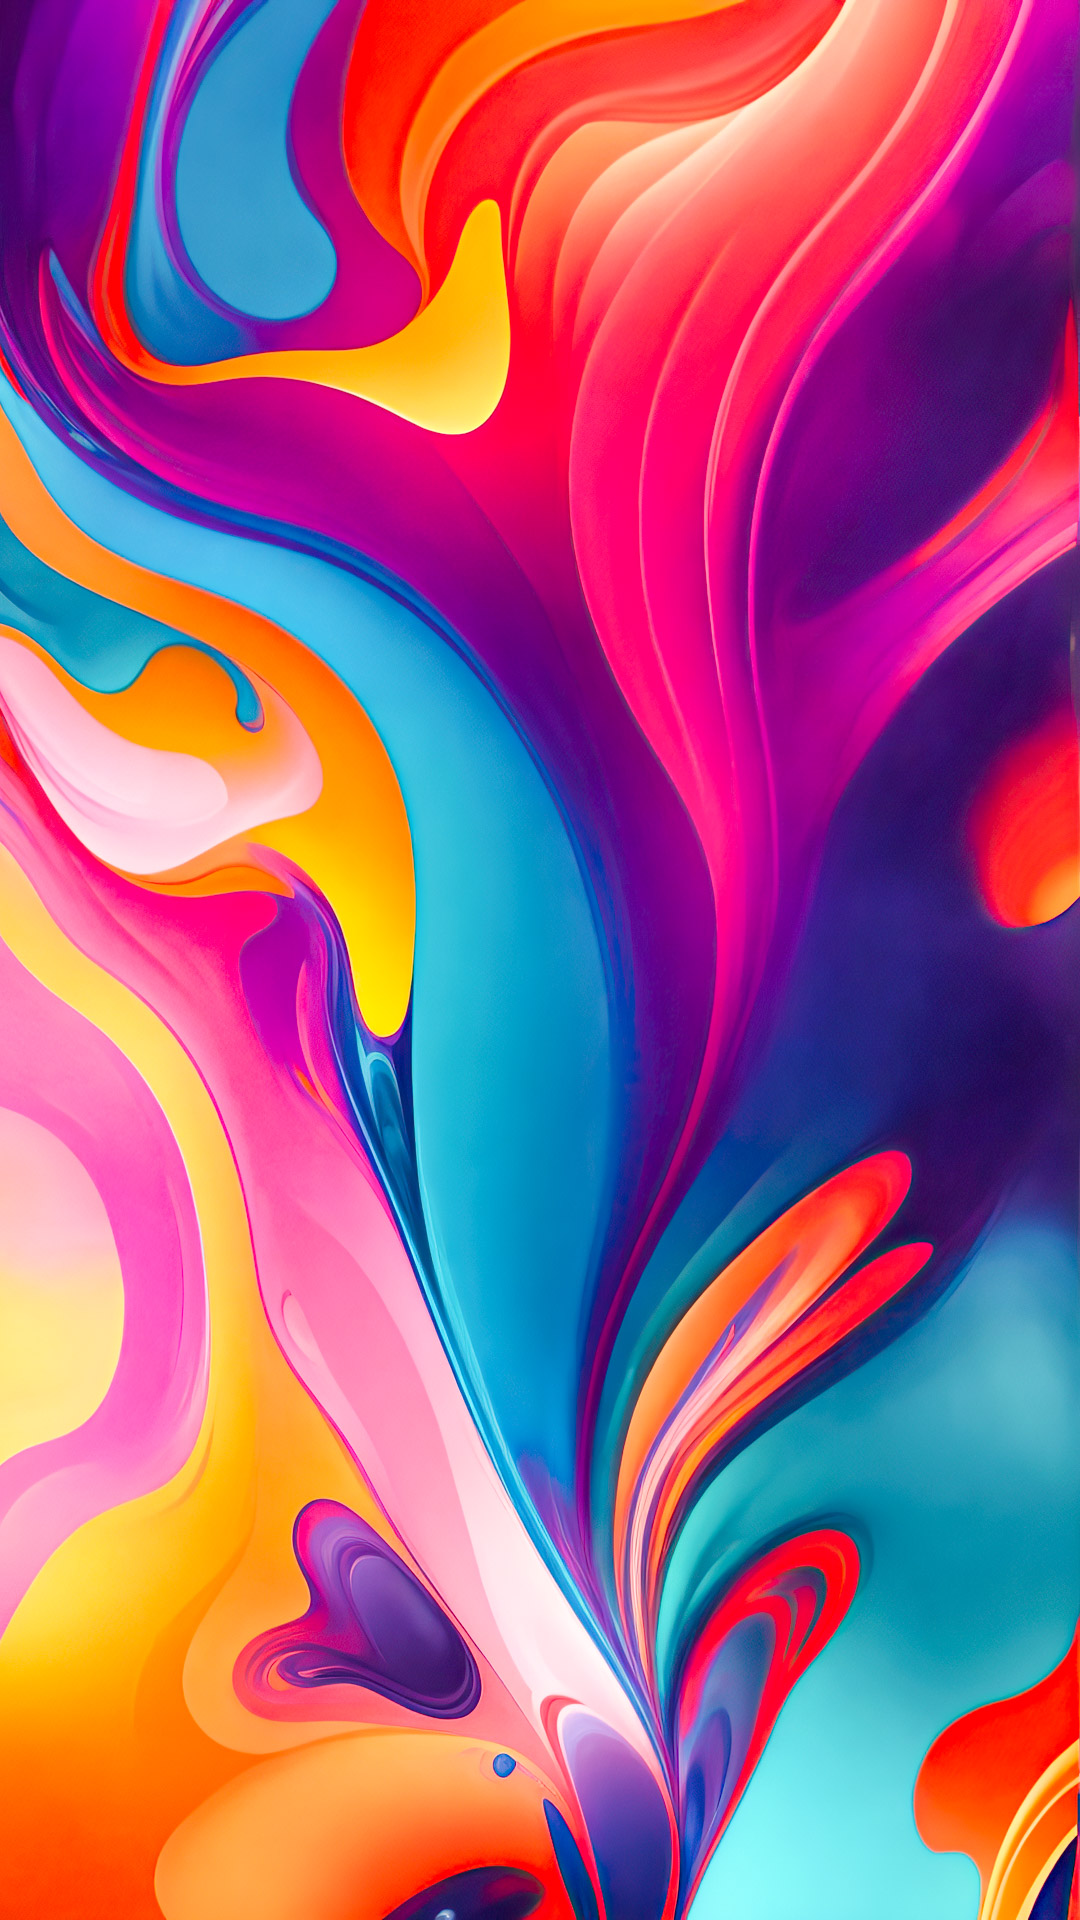 Immerse yourself in the chaos and spiritualism of mobile abstract HD wallpapers, conveying complex emotions through vibrant colors and intricate work.